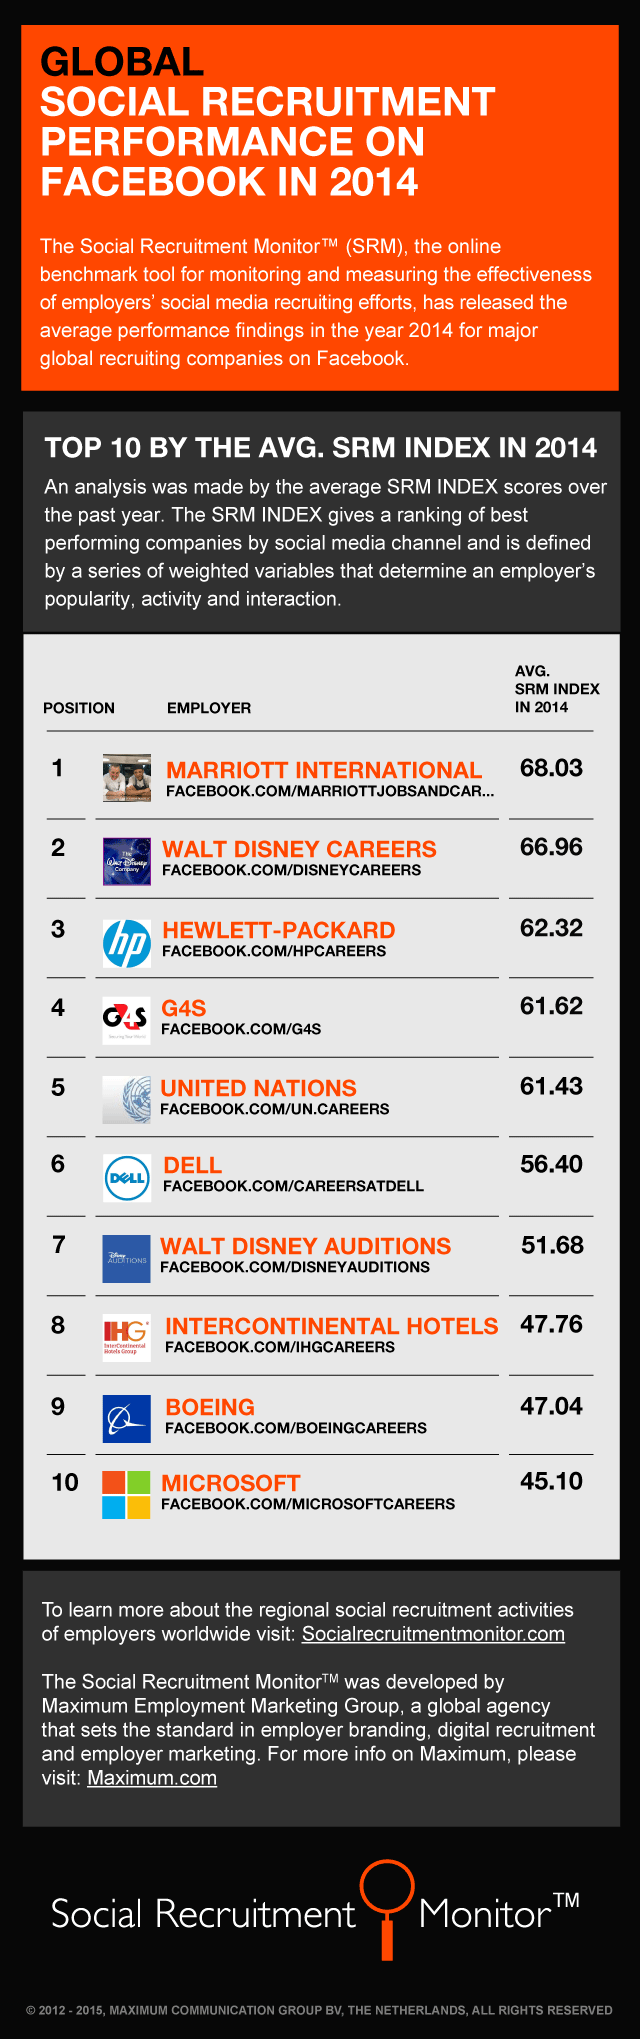 Top performing global employers using Facebook for recruiting